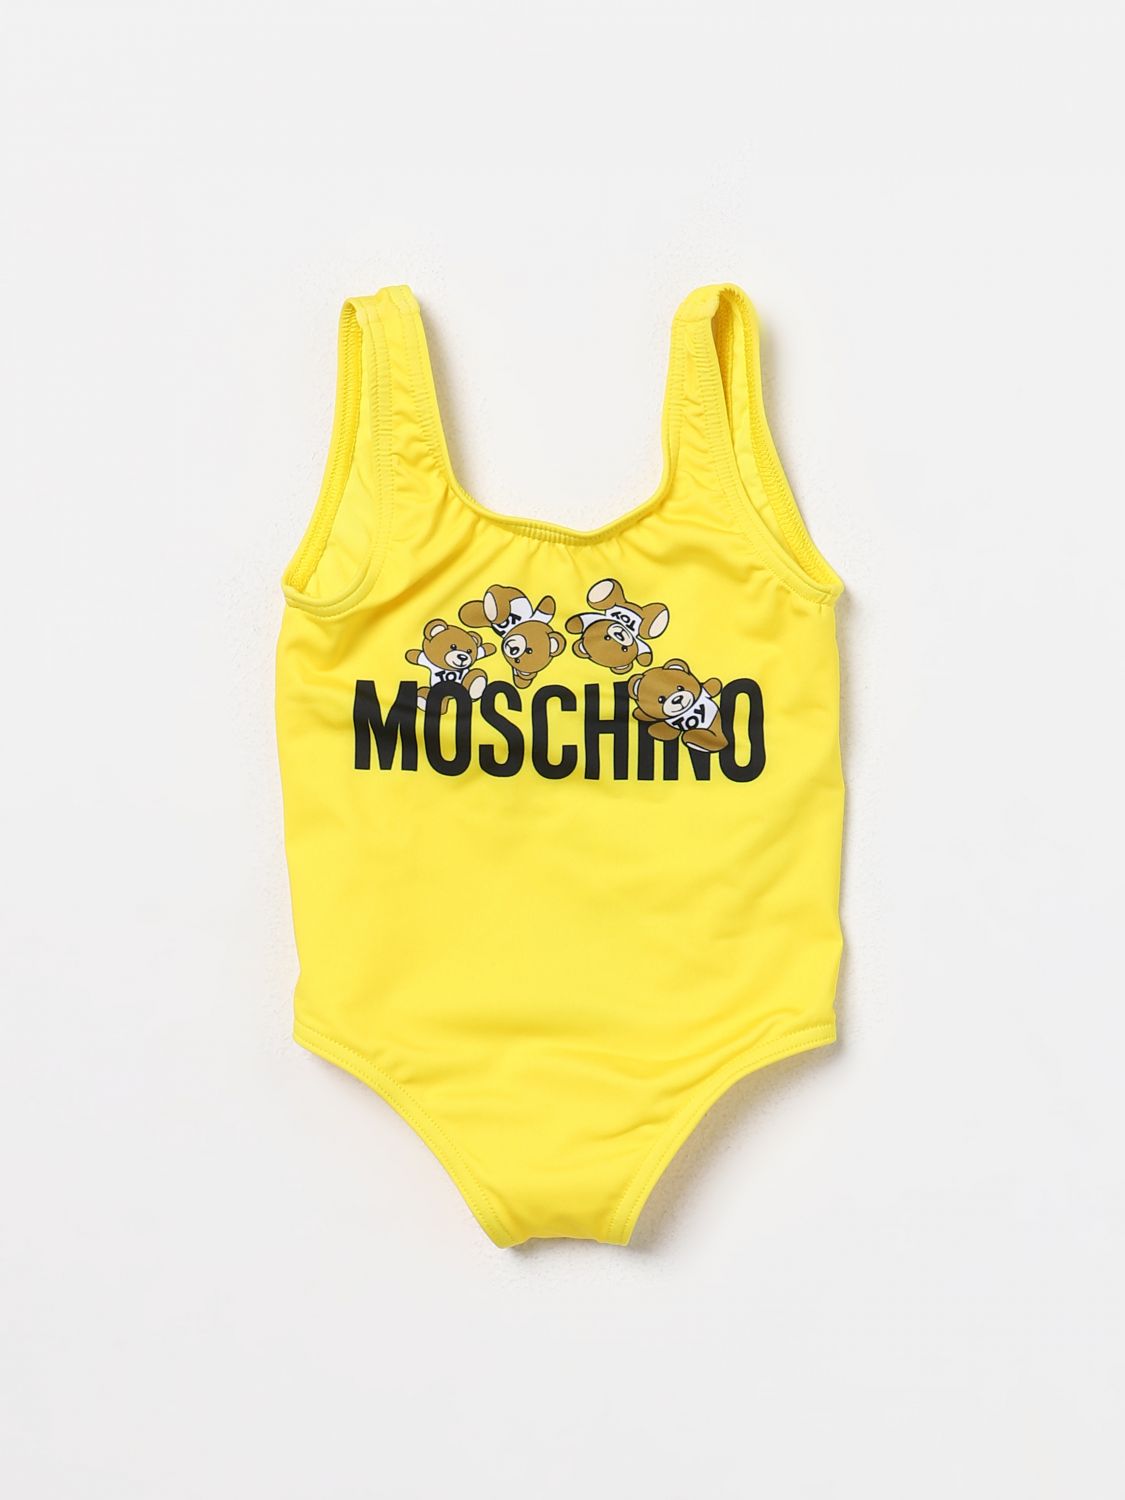 Moschino Baby Swimsuit  Kids Color Yellow